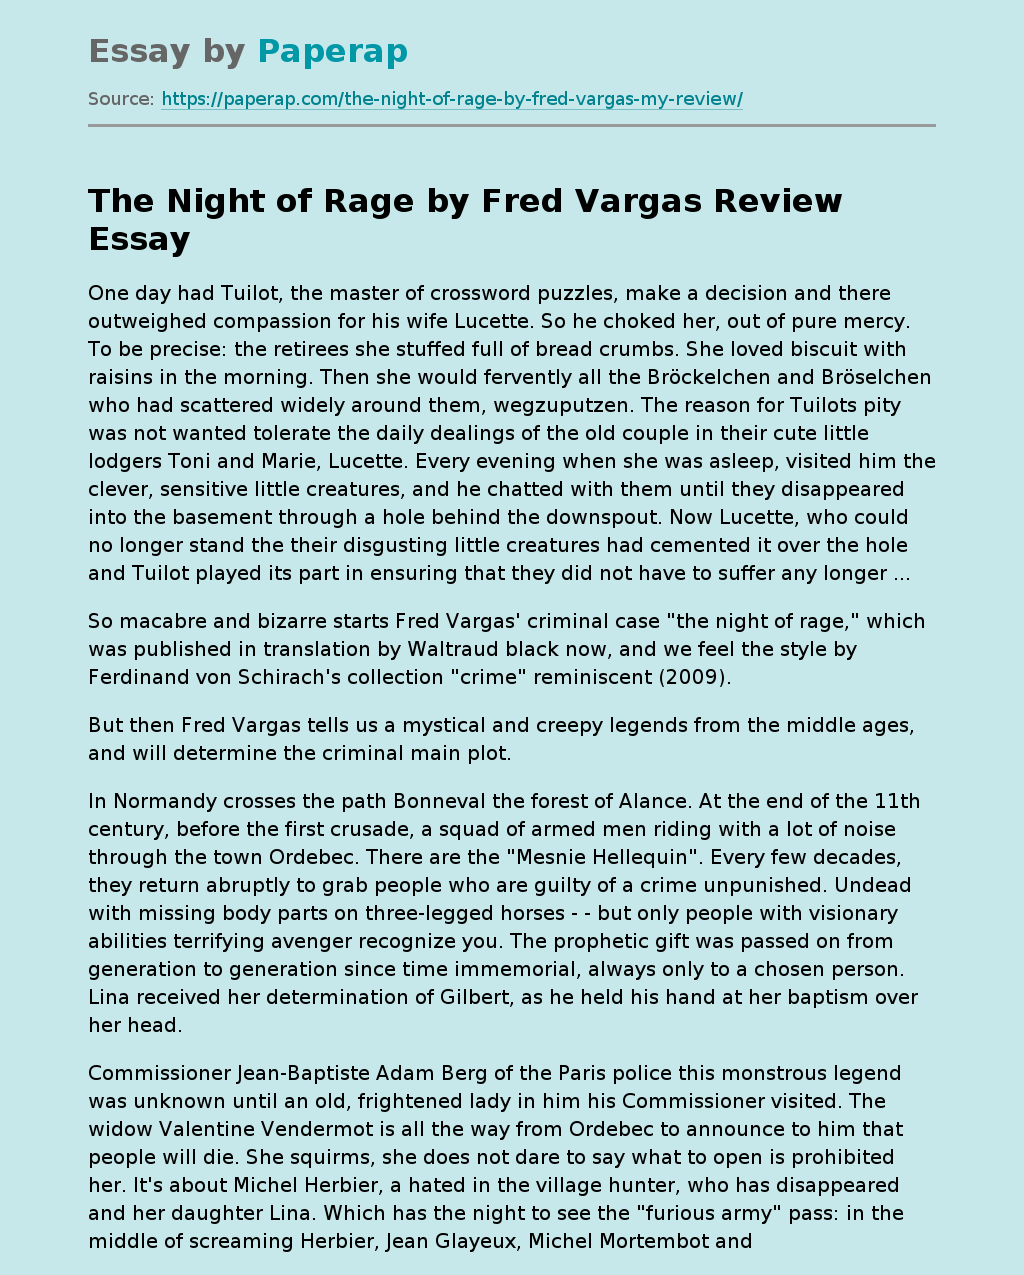 The Night of Rage by Fred Vargas Review